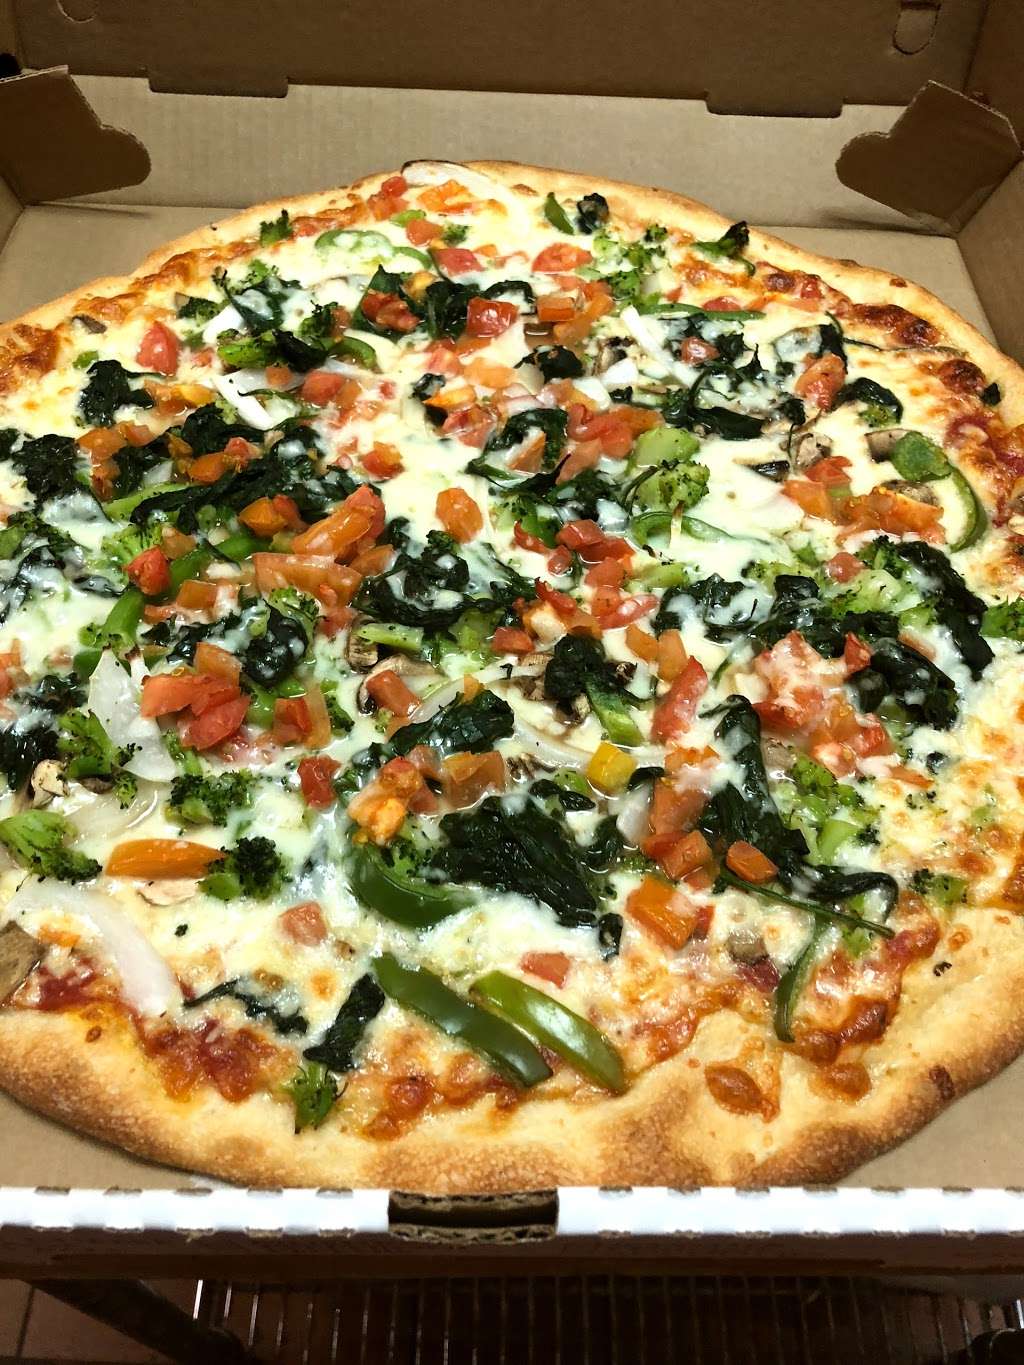 Montgomery Pizza | 820 Upper State Rd, North Wales, PA 19454 | Phone: (215) 361-6161